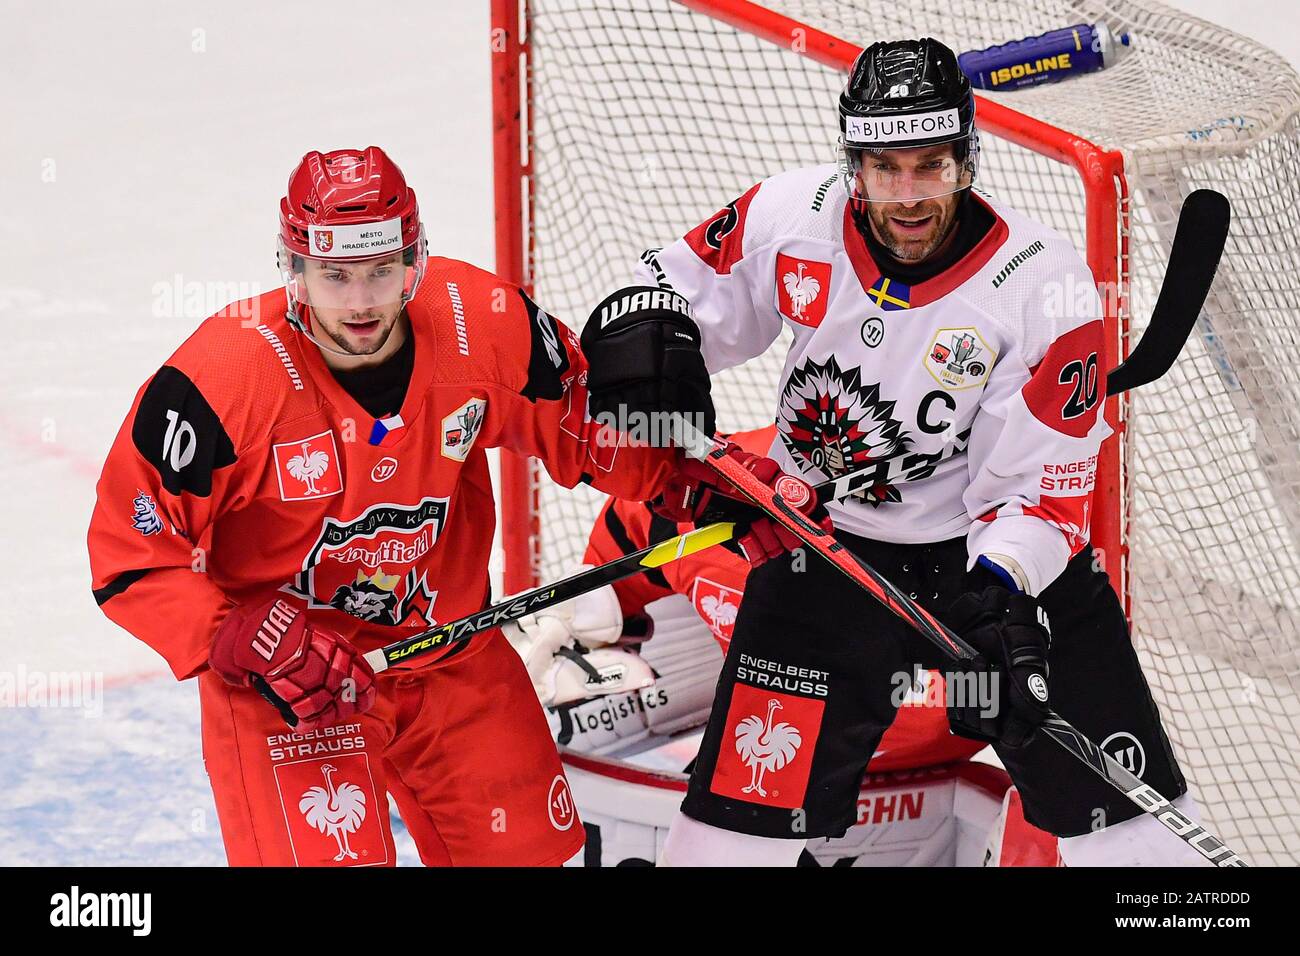 From left MICHAEL GASPAR of Hradec Kralove and JOEL LUNDQVIST of Frolunda in action during the Ice hockey Champions League playoff final: Hradec Kralove vs Frolunda (Sweden) in Hradec Kralove, Czech Republic, February 4, 2020. (CTK Photo/David Tanecek) Stock Photo